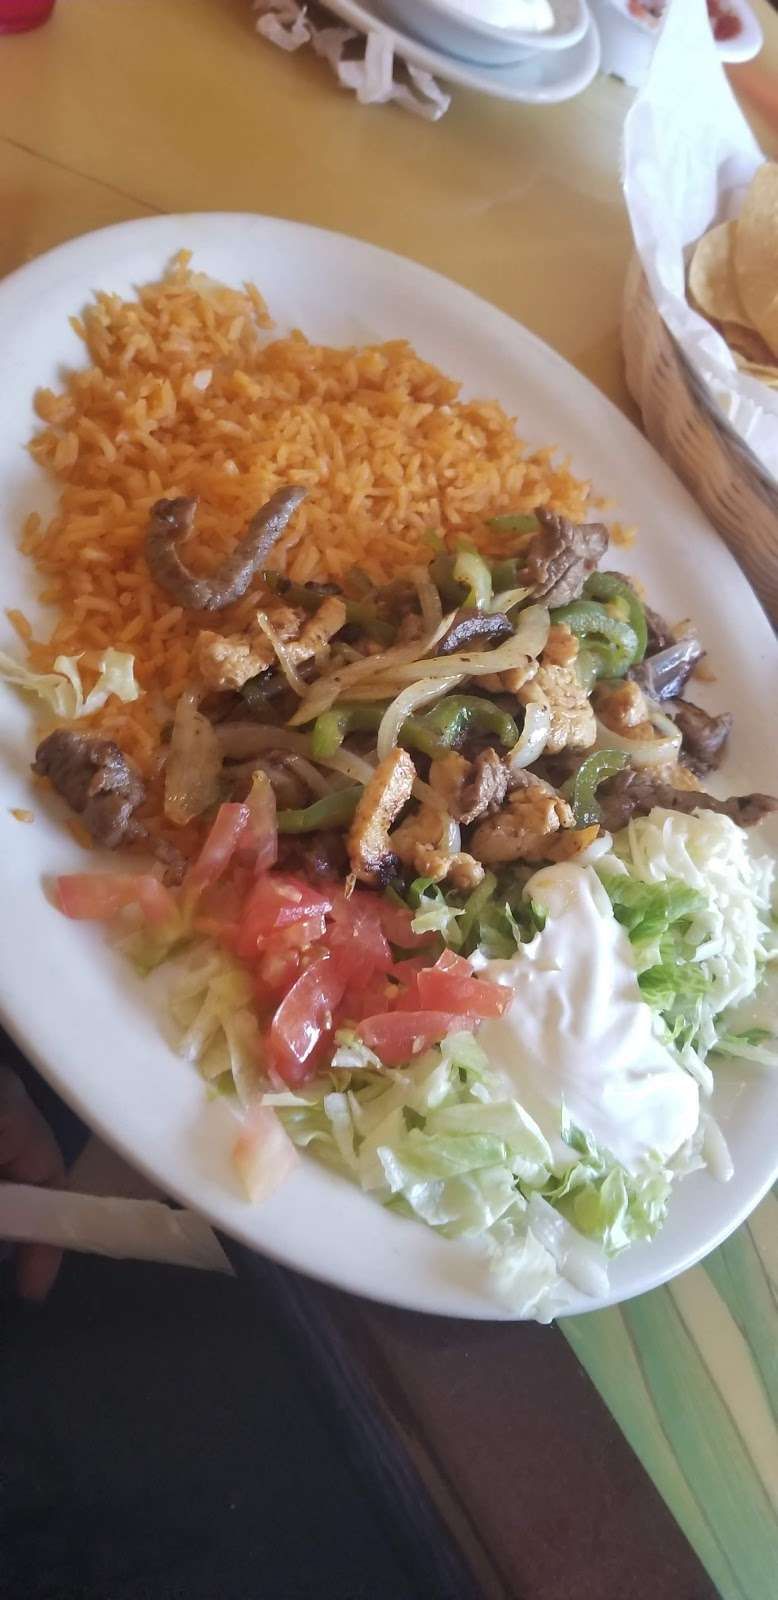 Sabor A Mexico | 201 Mineral Ave, Mineral, VA 23117 | Phone: (540) 894-5500